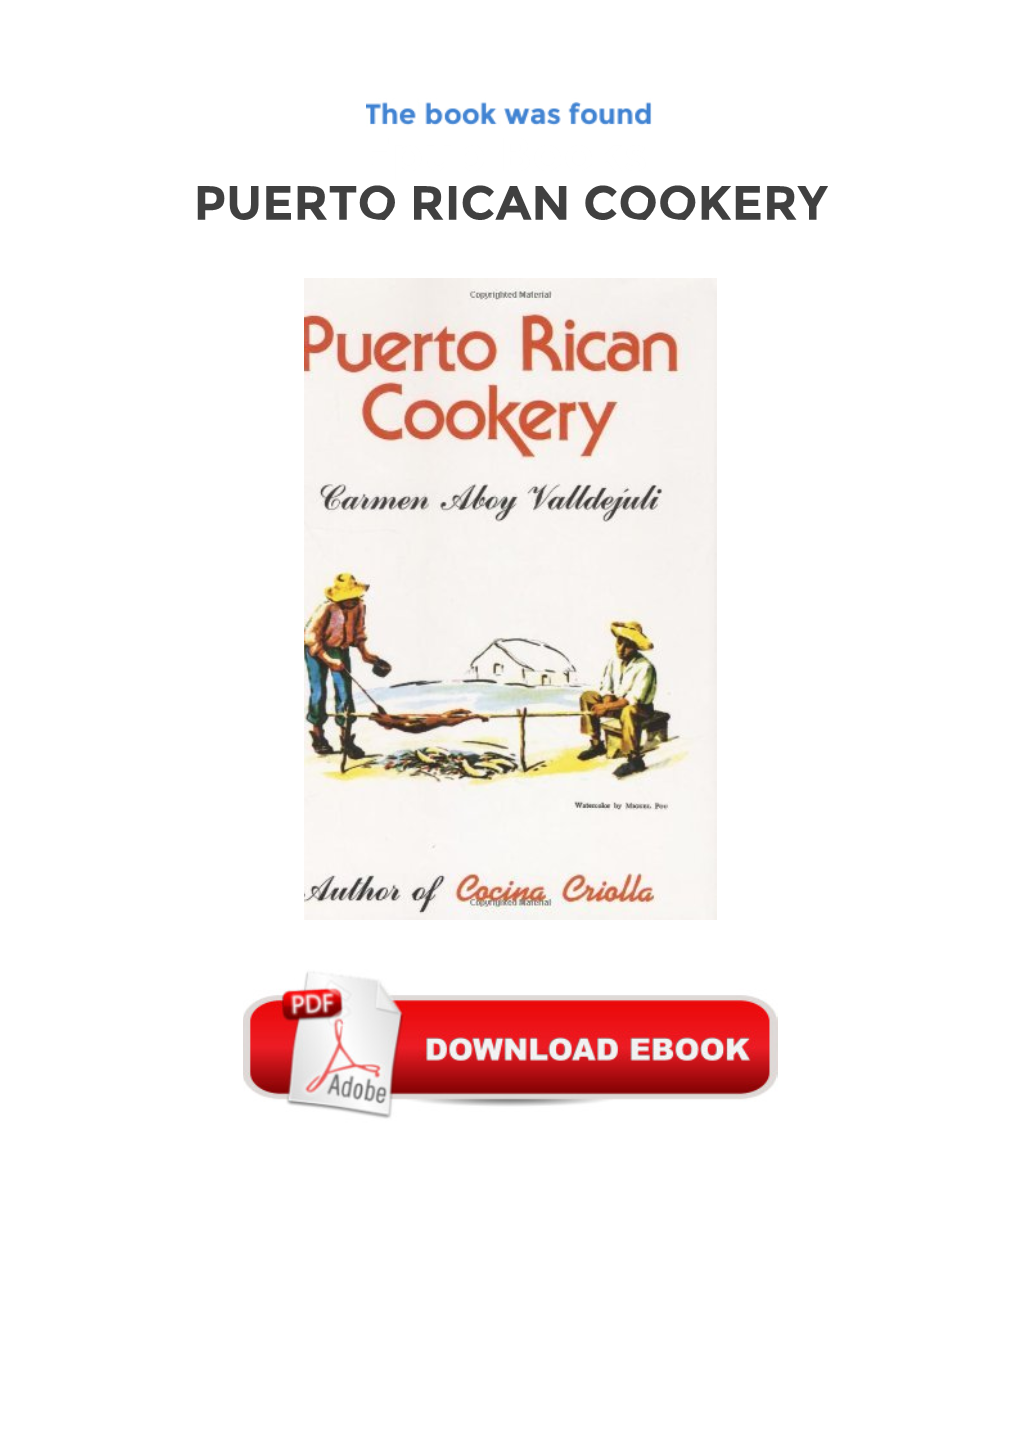 Epub Books PUERTO RICAN COOKERY Takes the Reader on an Interesting Culinary Journey